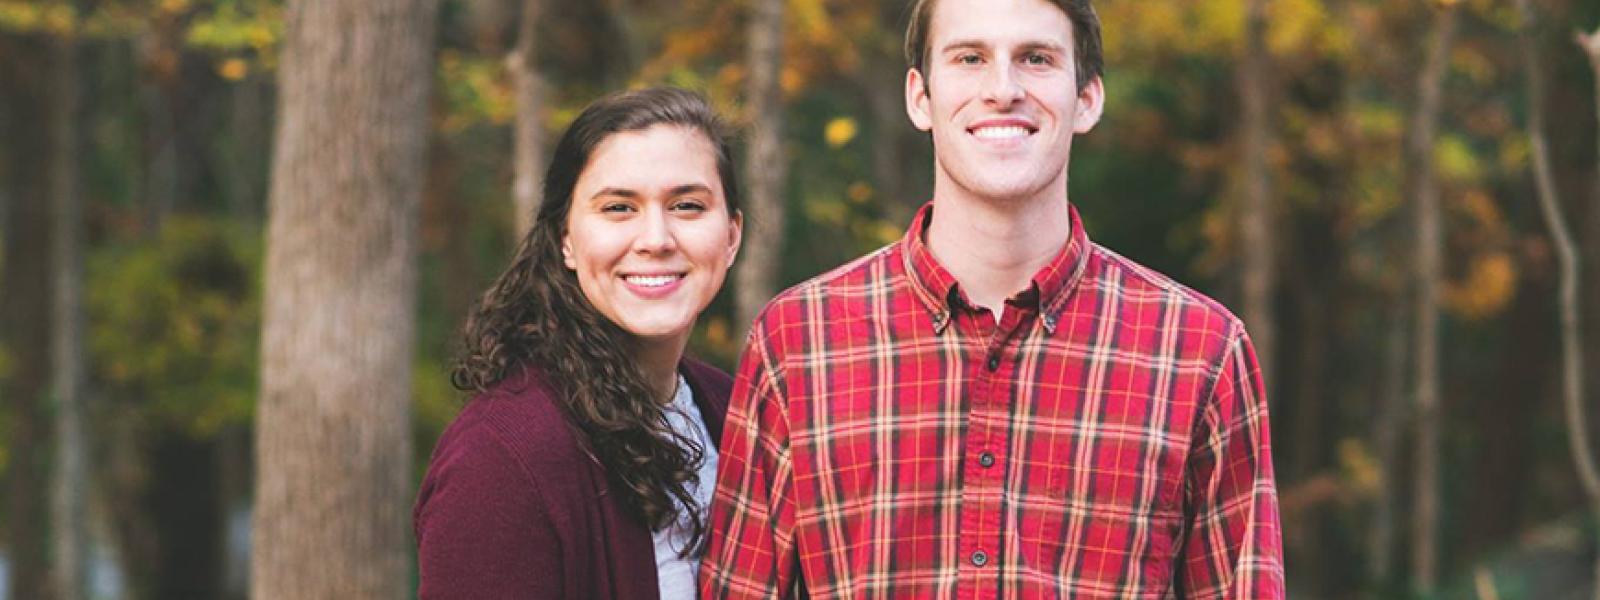 Cole Harper, area director of Mid-Carolina Young Life in Newberry, SC and his wife Tori. 